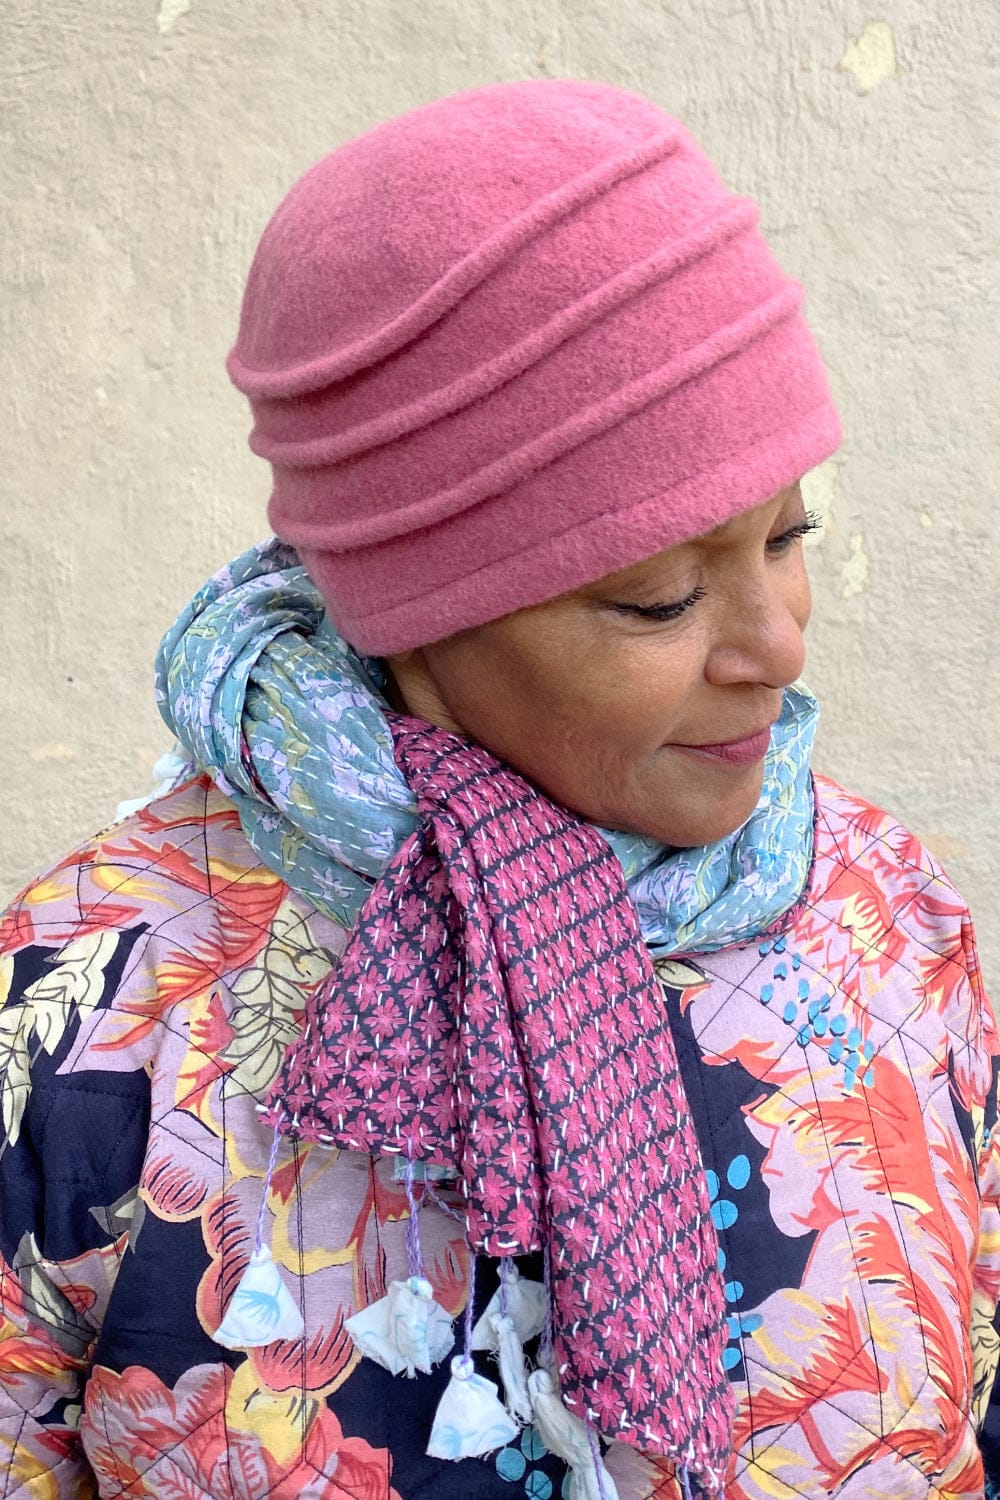 Wool Cloche Hat with Pleats in a soft pink being worn with a pink and blue cotton kantha stitch scarf.